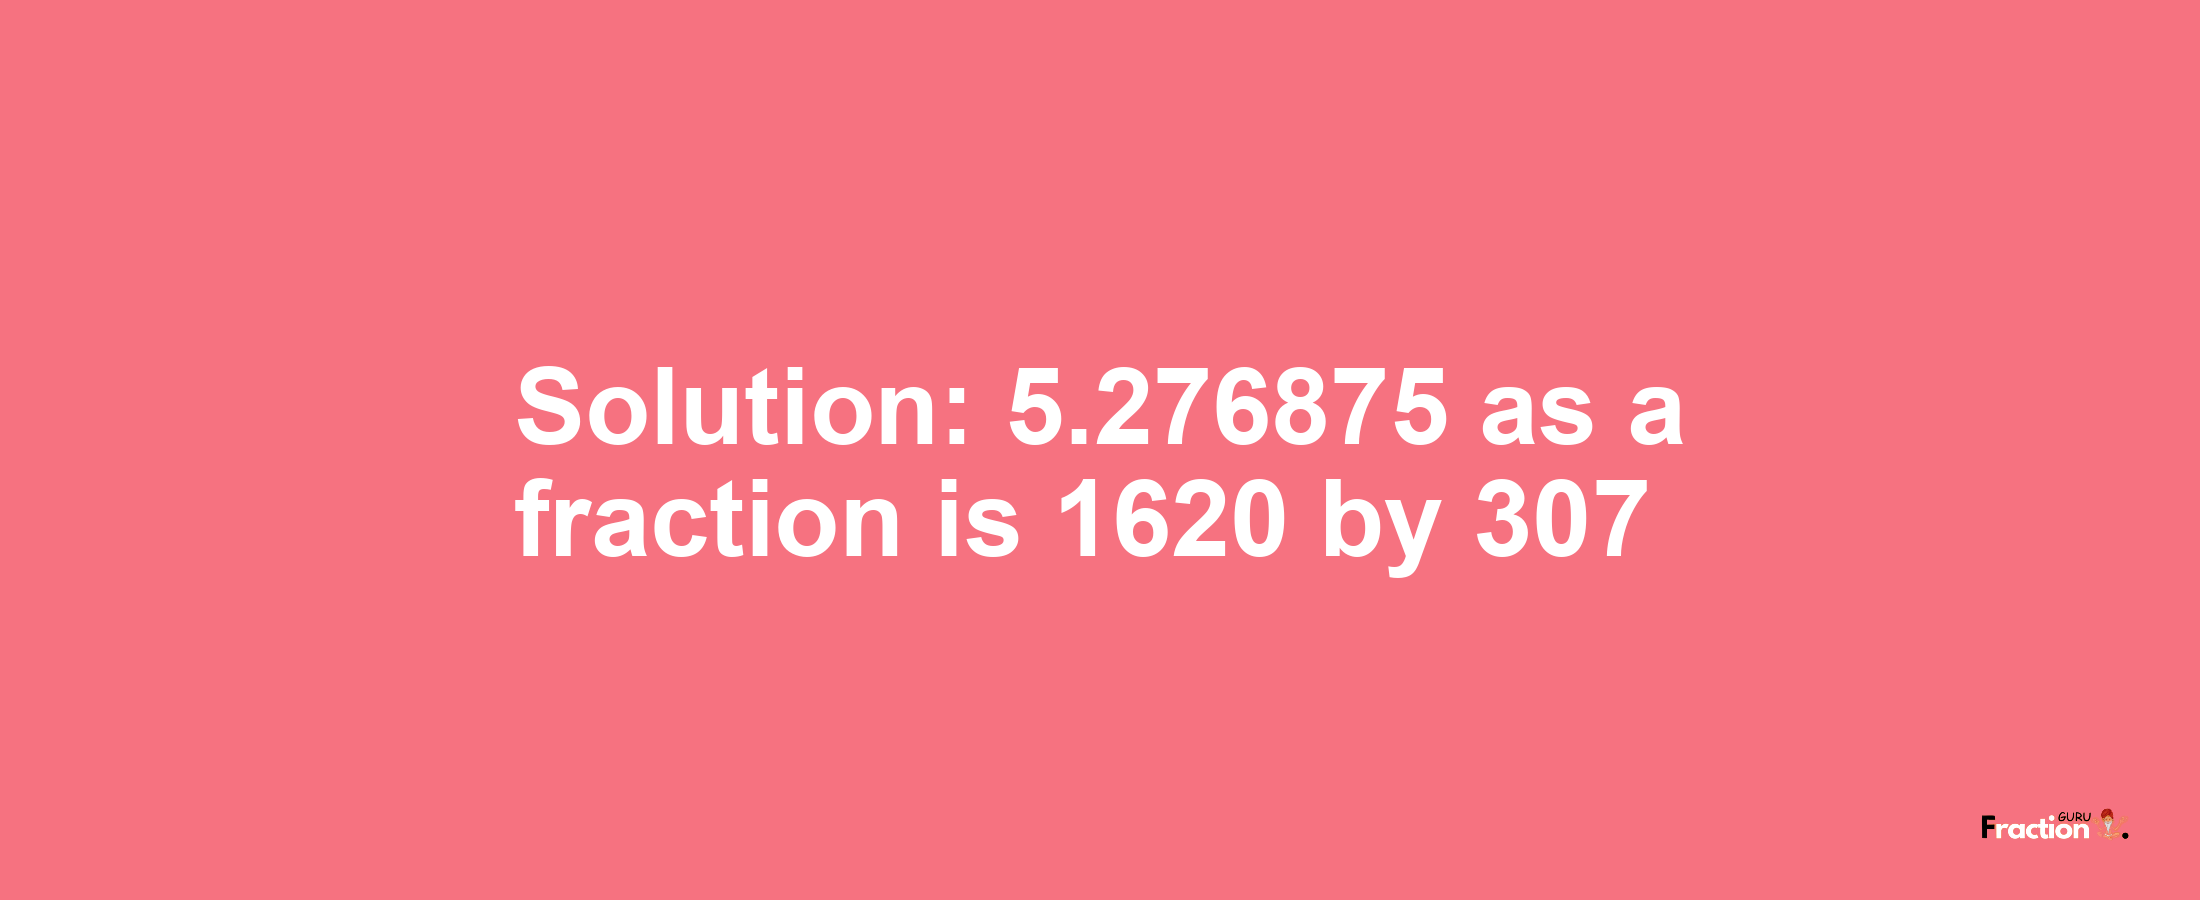 Solution:5.276875 as a fraction is 1620/307